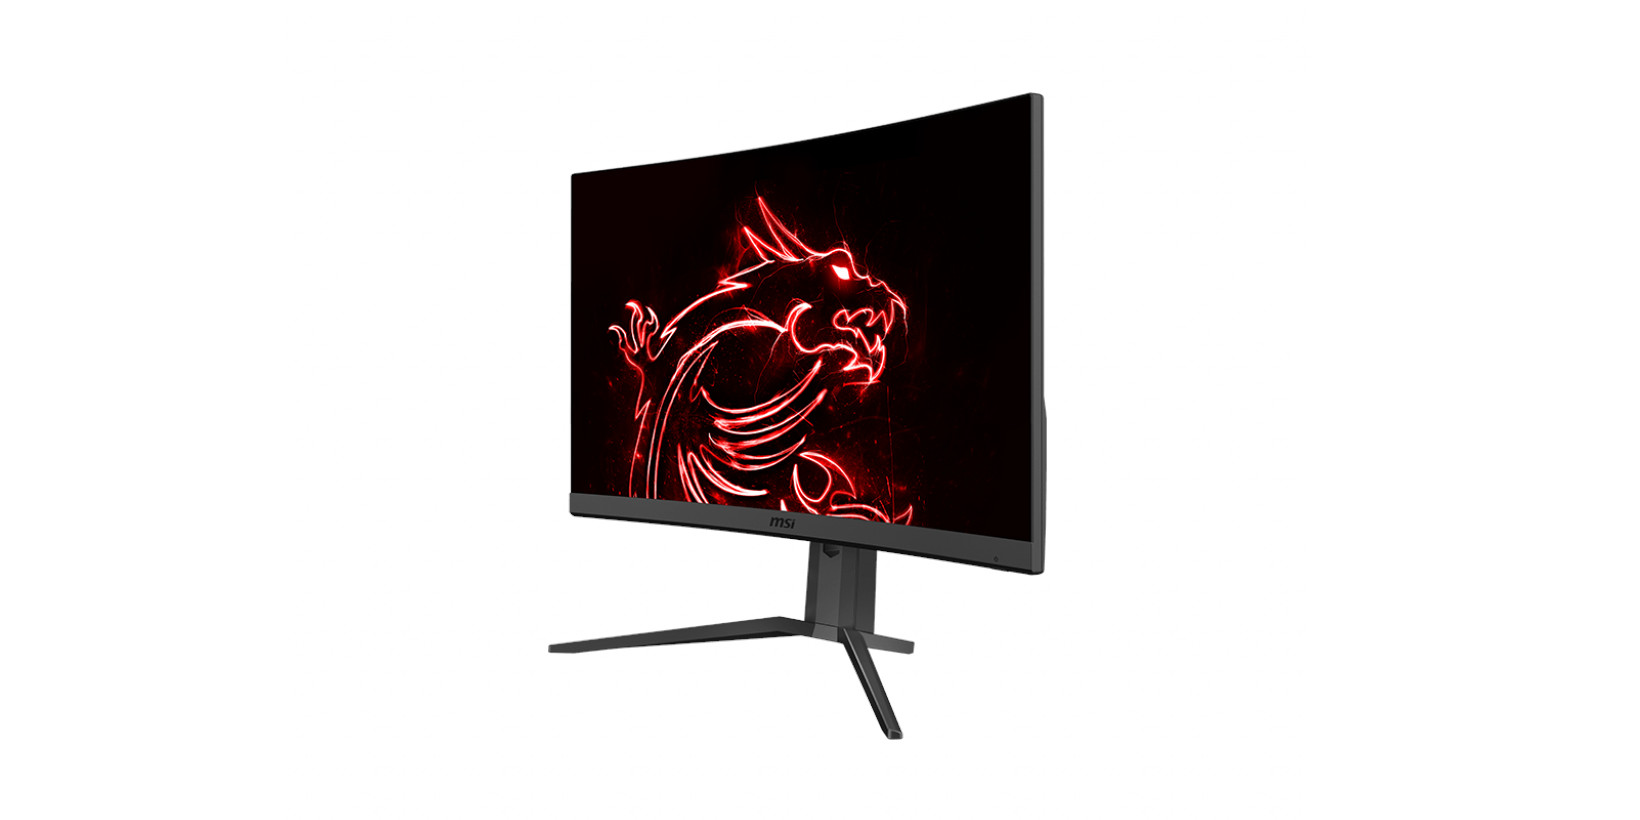 MSI Unveils Two MORE New Optix Gaming Monitors, G27C7 QHD and